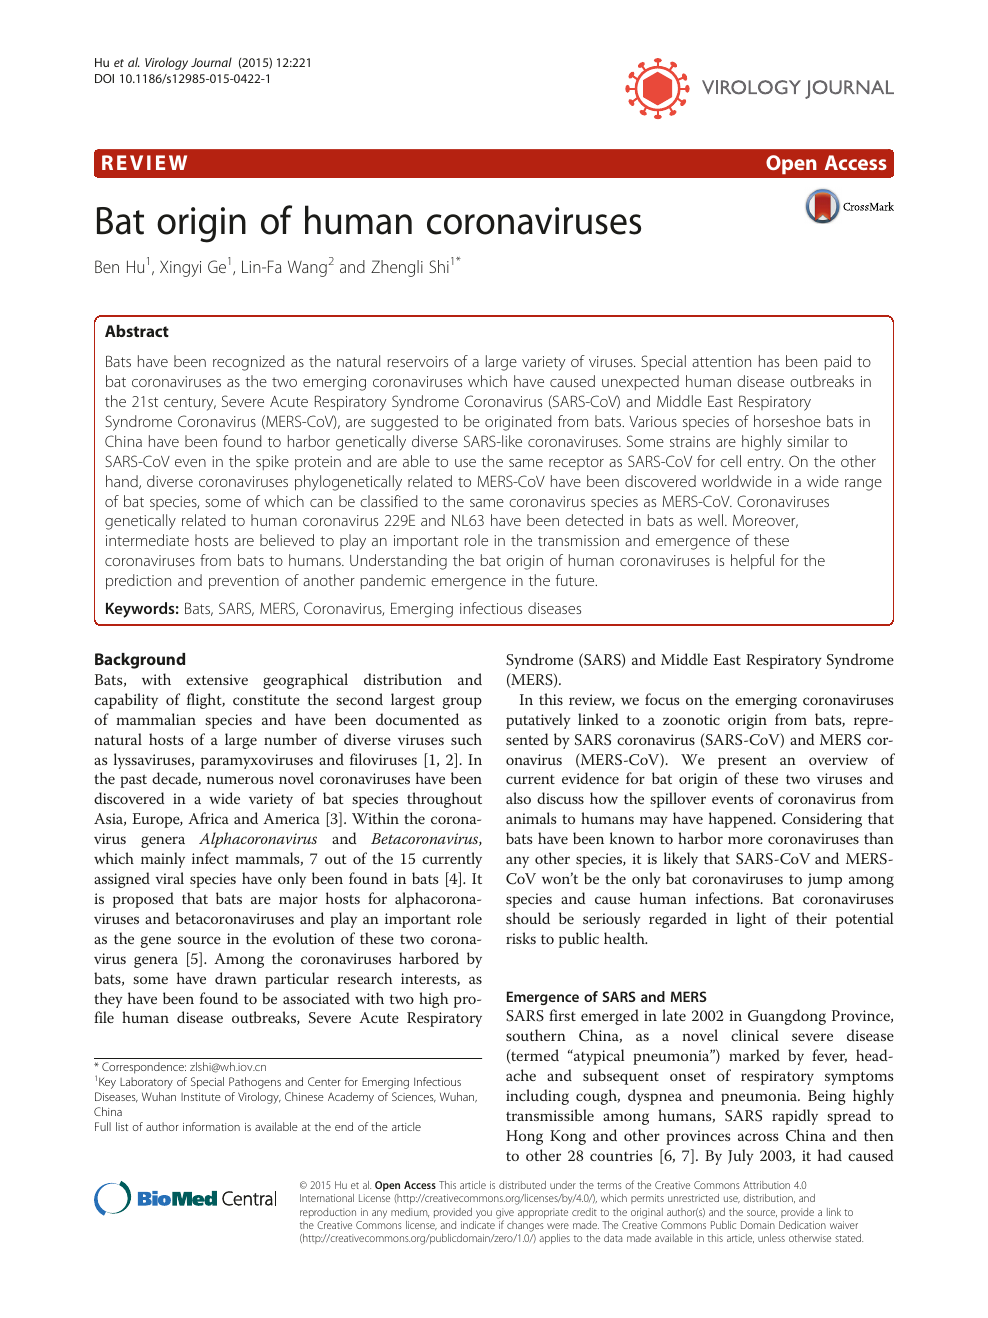 Bat Origin Of Human Coronaviruses Topic Of Research Paper In Veterinary Science Download Scholarly Article Pdf And Read For Free On Cyberleninka Open Science Hub